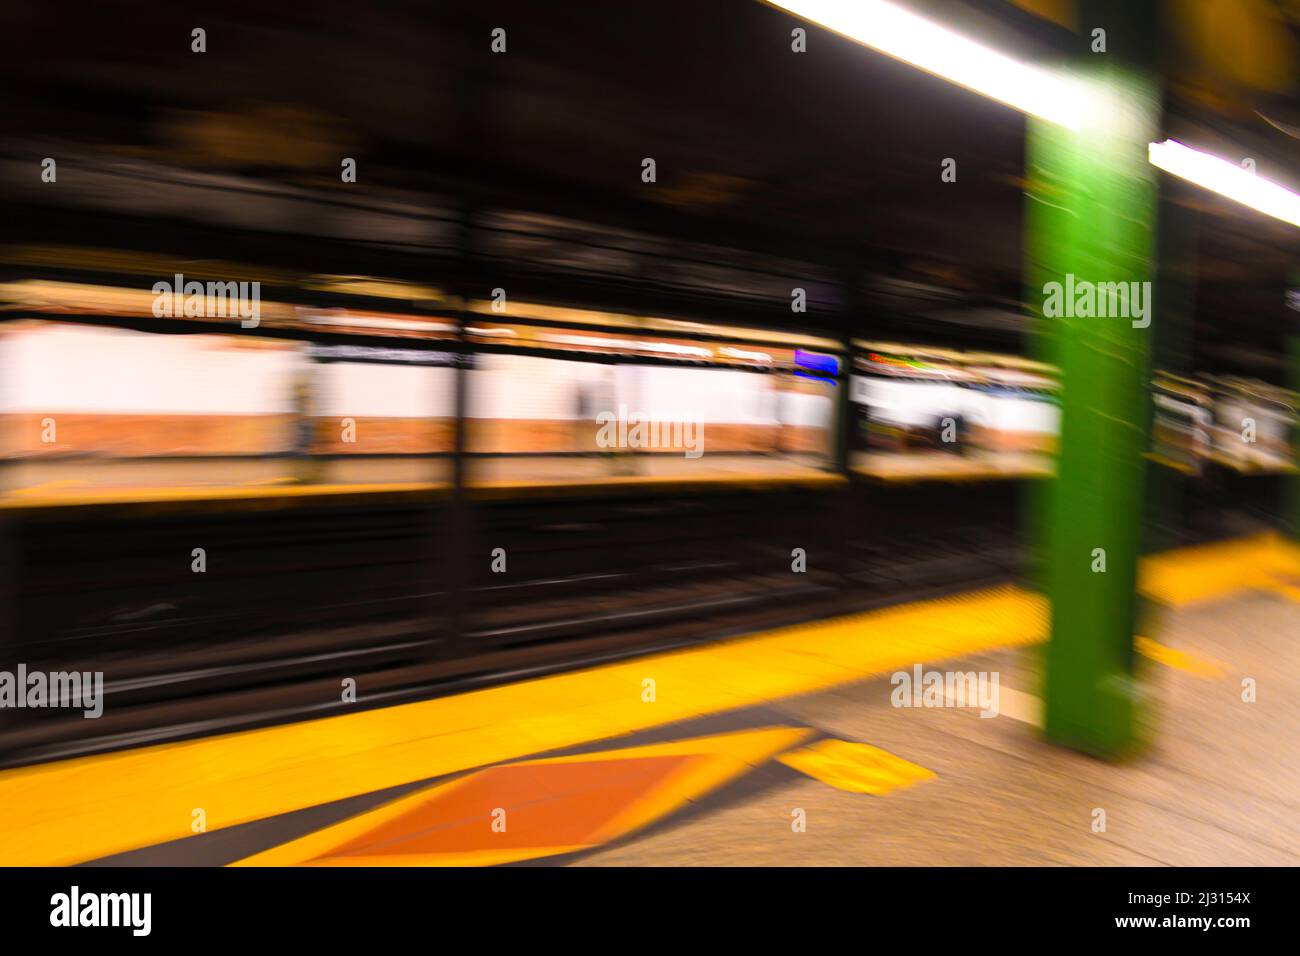 blurred image of a subway station in New York City with different colors and shaps Stock Photo